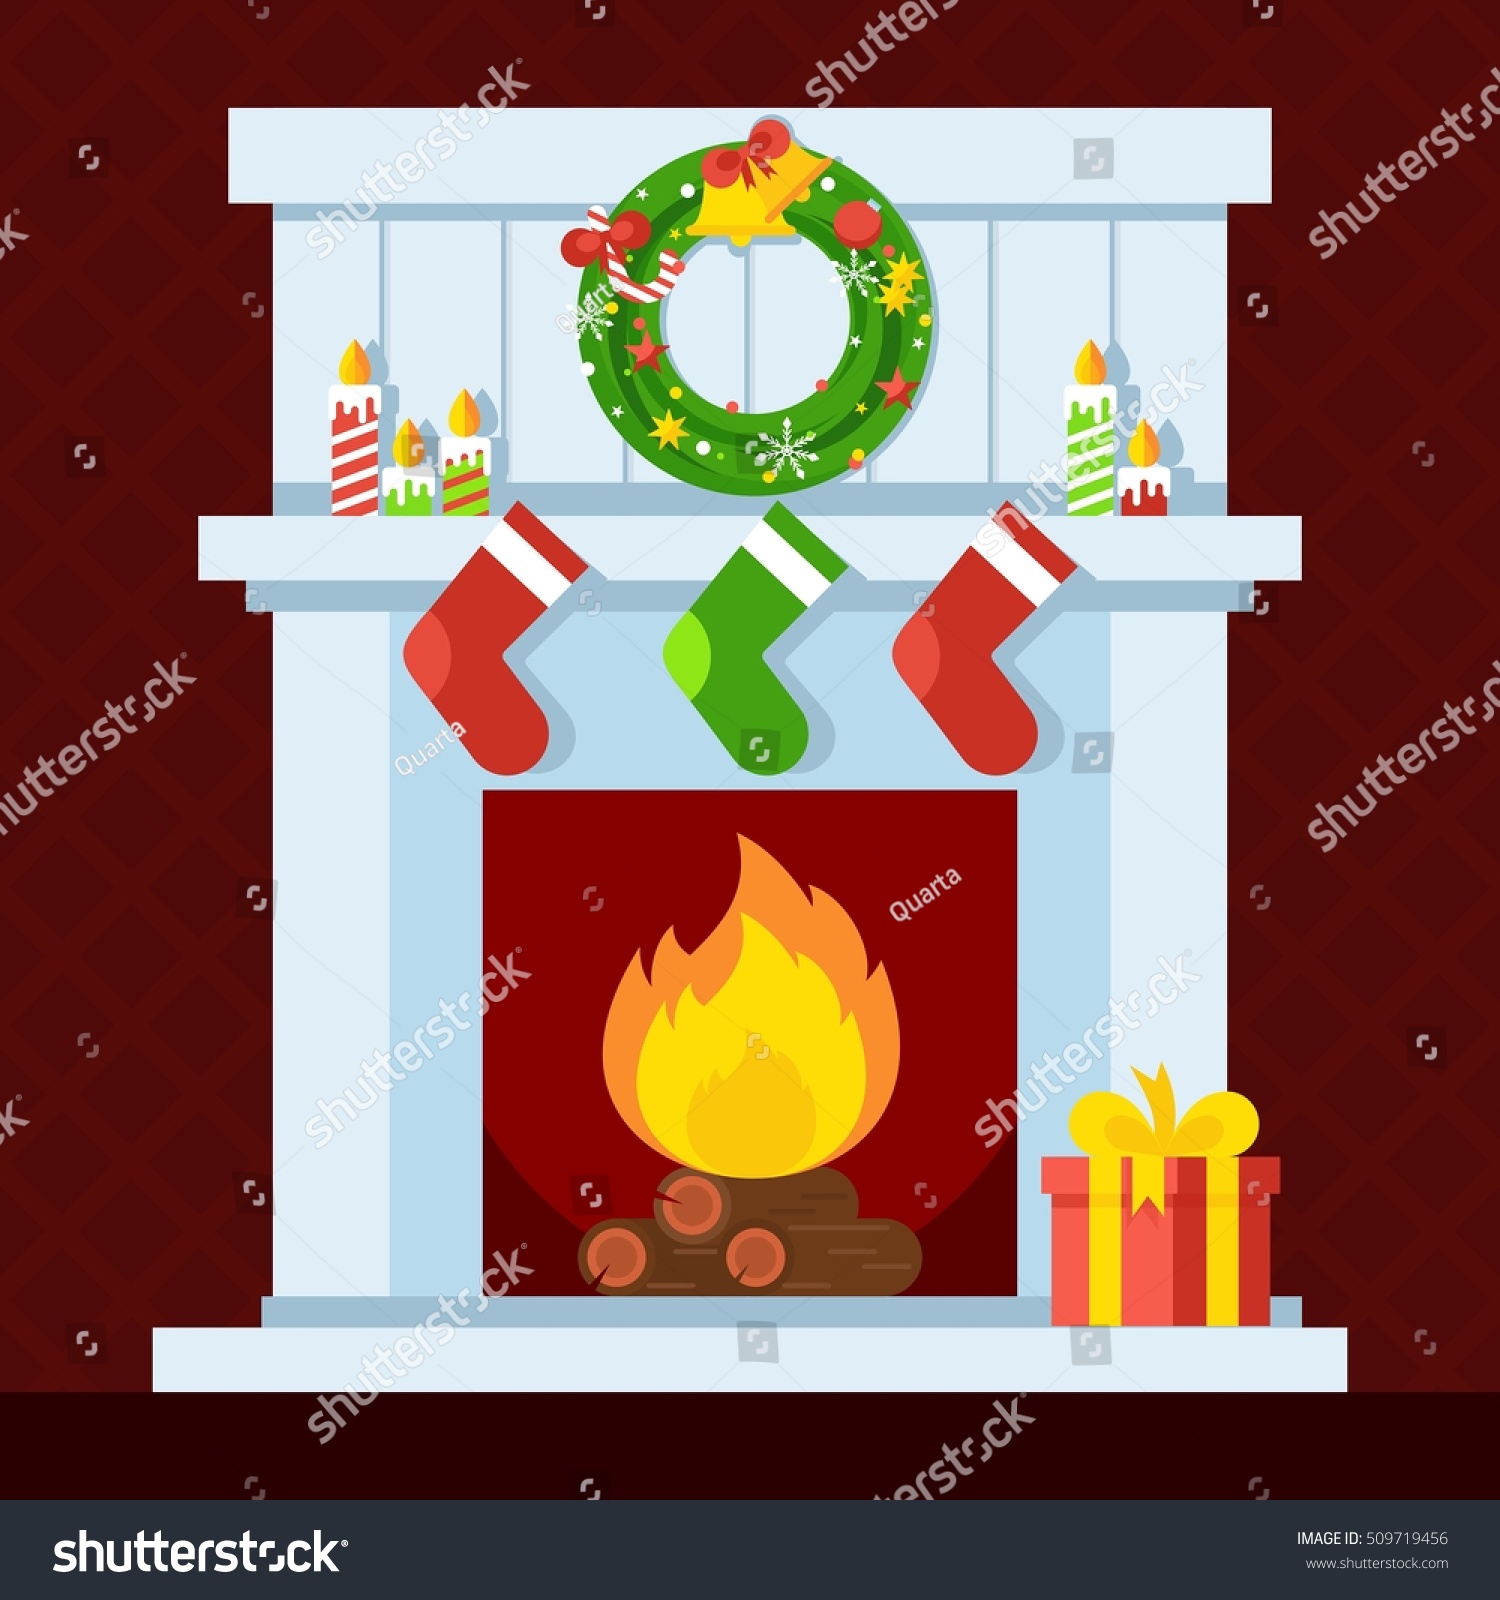 Christmas Fireplace Xmas Fire Home Decoration Stock Vector 509719456 ...